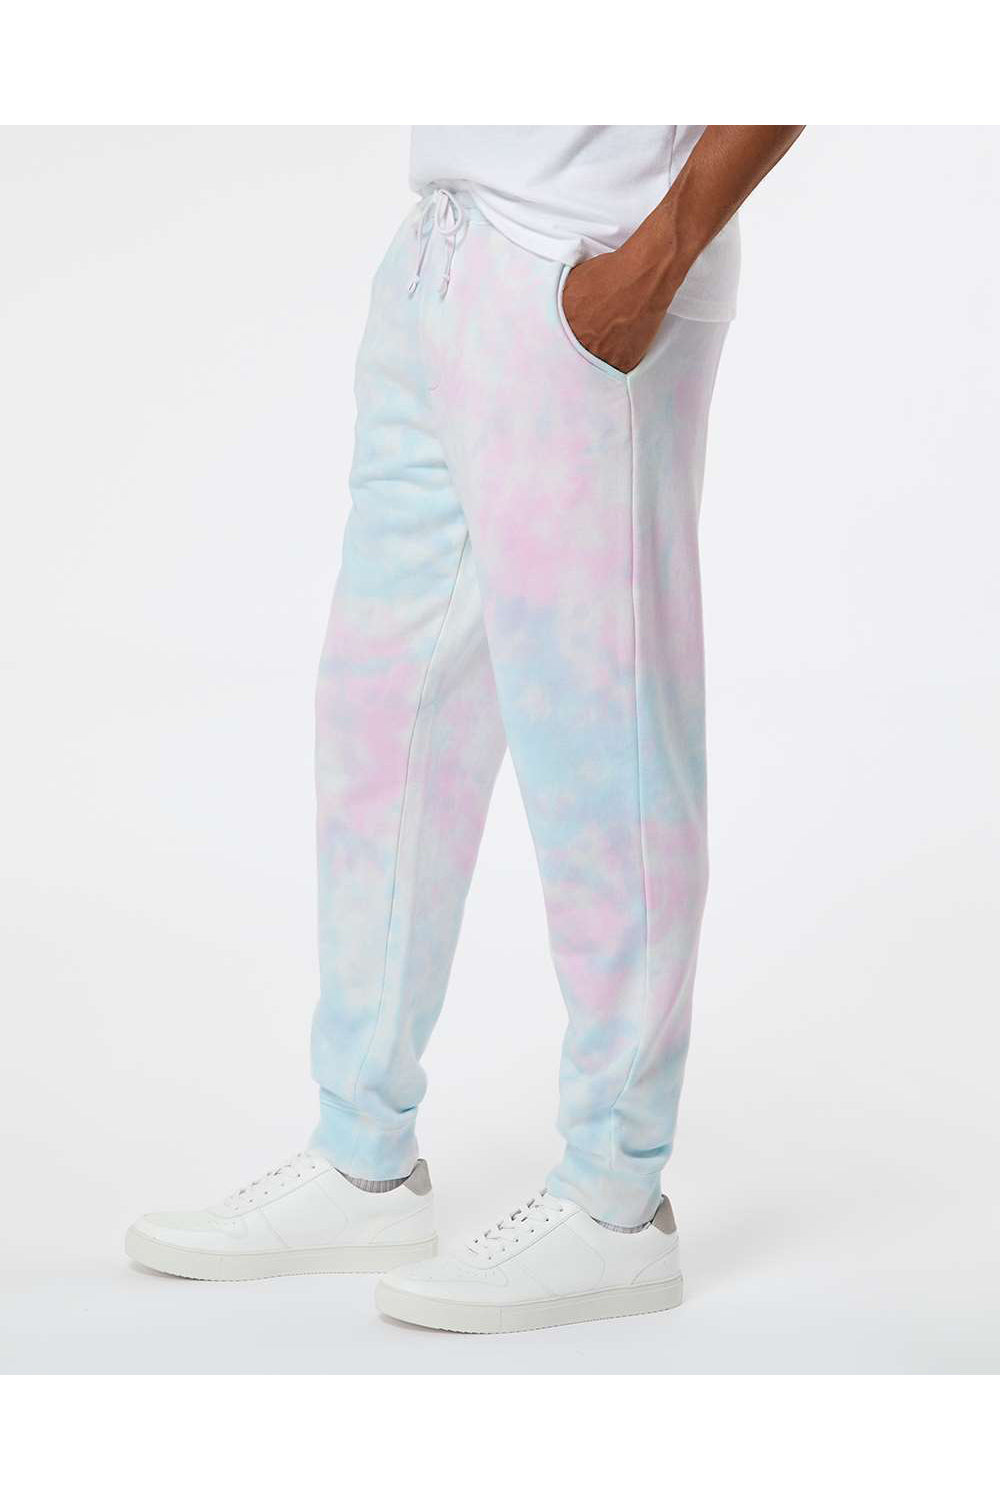 Independent Trading Co. PRM50PTTD Mens Tie-Dye Fleece Sweatpants w/ Pockets Cotton Candy Model Side